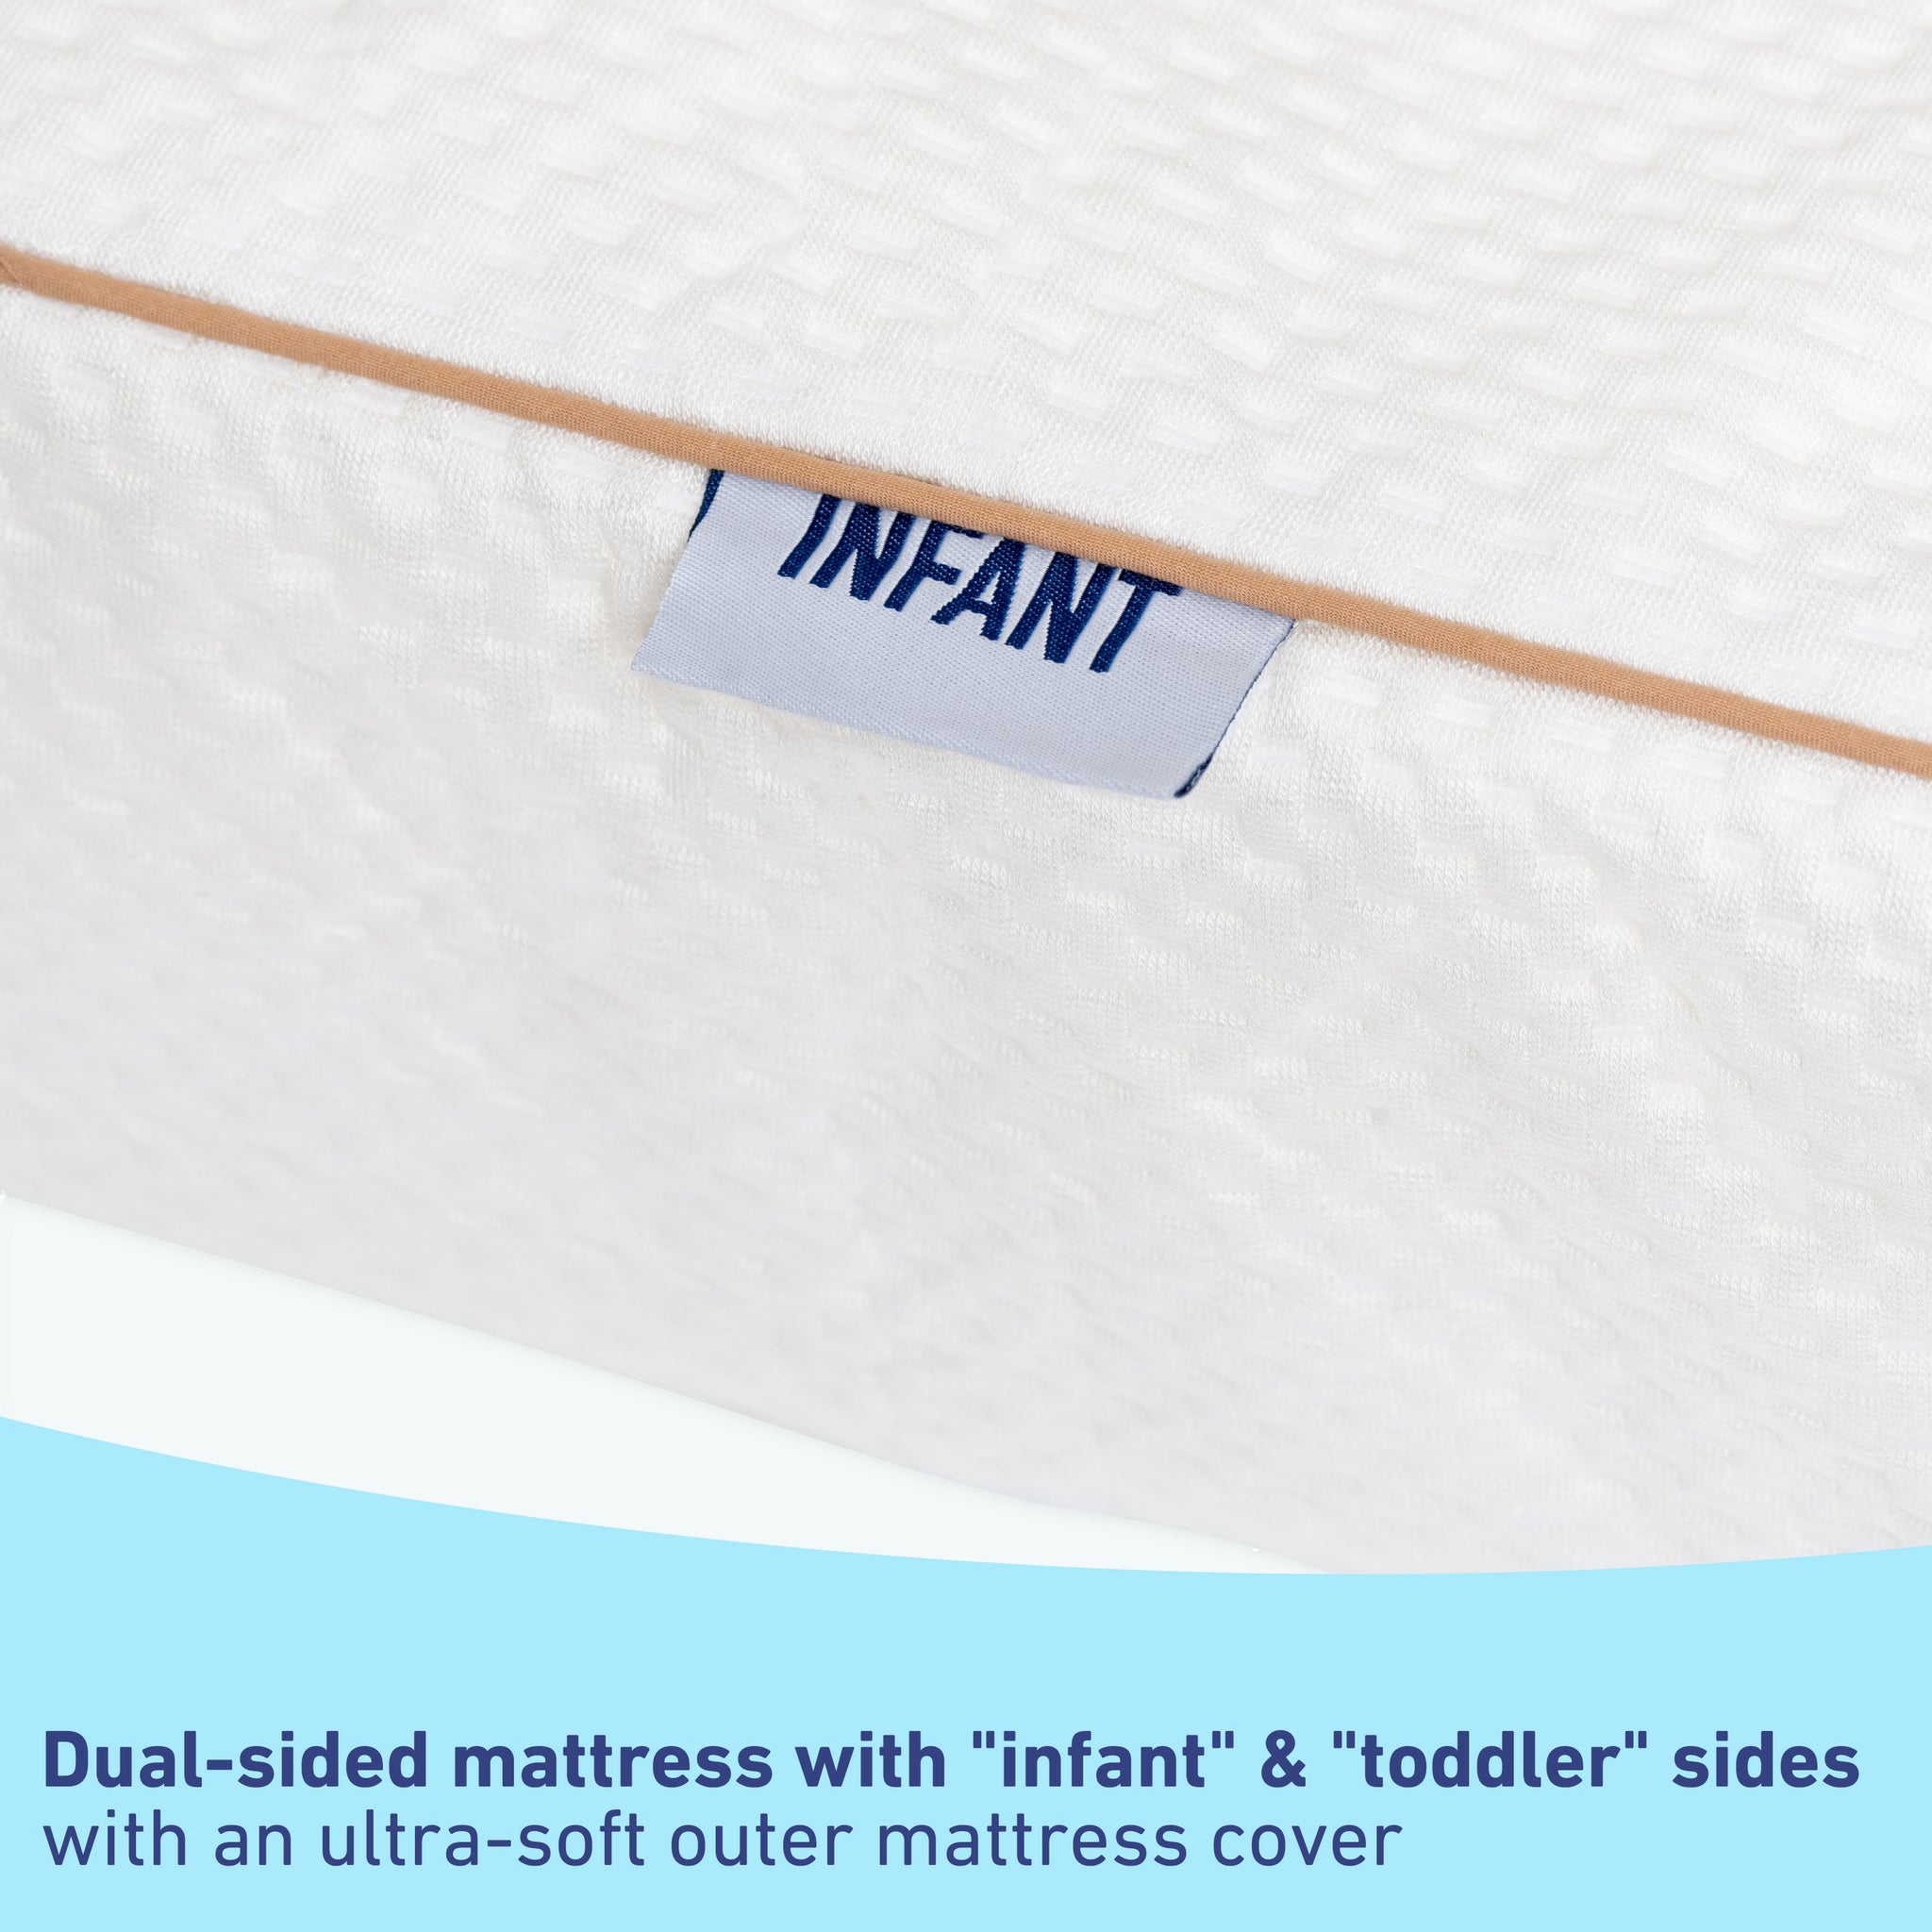 Baby mattress on the infant side graphic